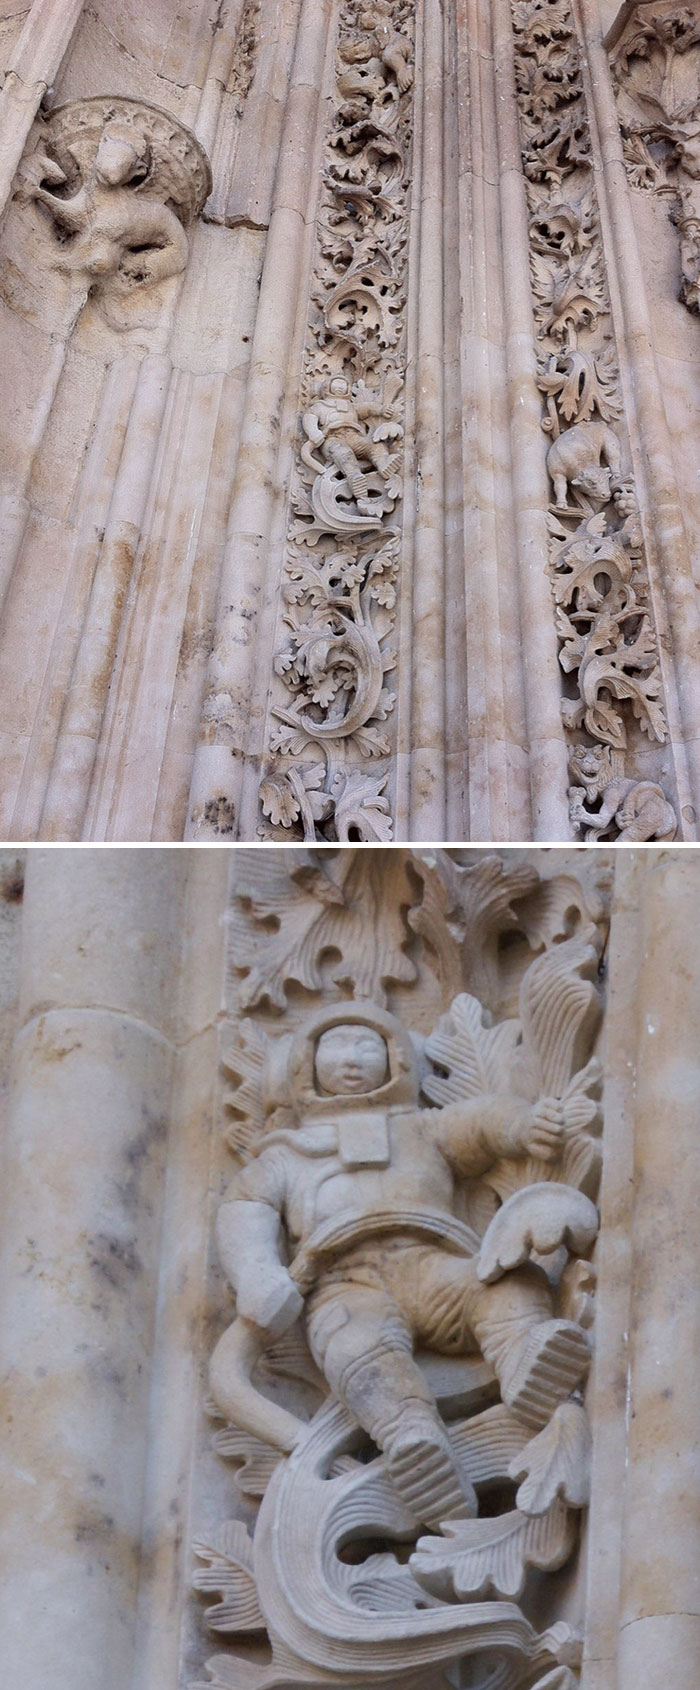 Found An Astronaut Carved Into The Entrance Of This 900-Year-Old Church In Salamanca, Spain